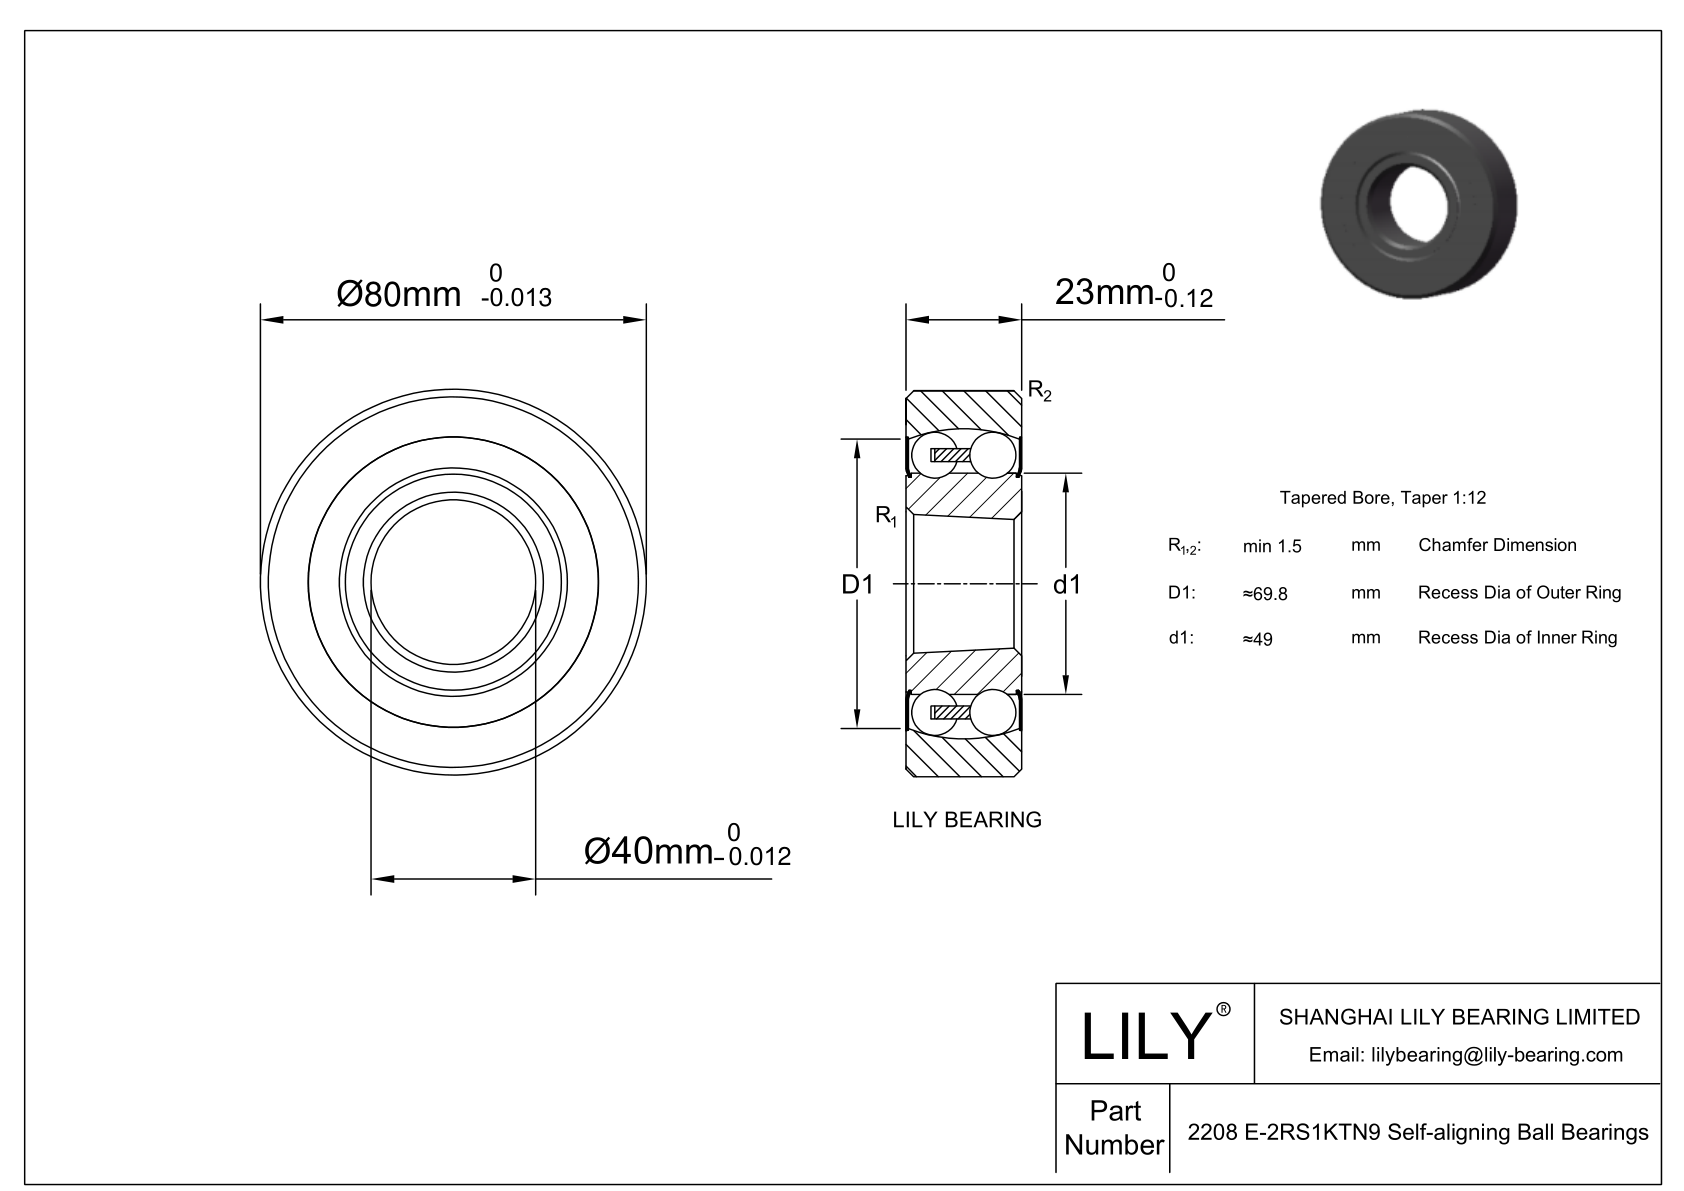 CE2208 E-SCPP Silicon Carbide Self Aligning Ball Bearings cad drawing